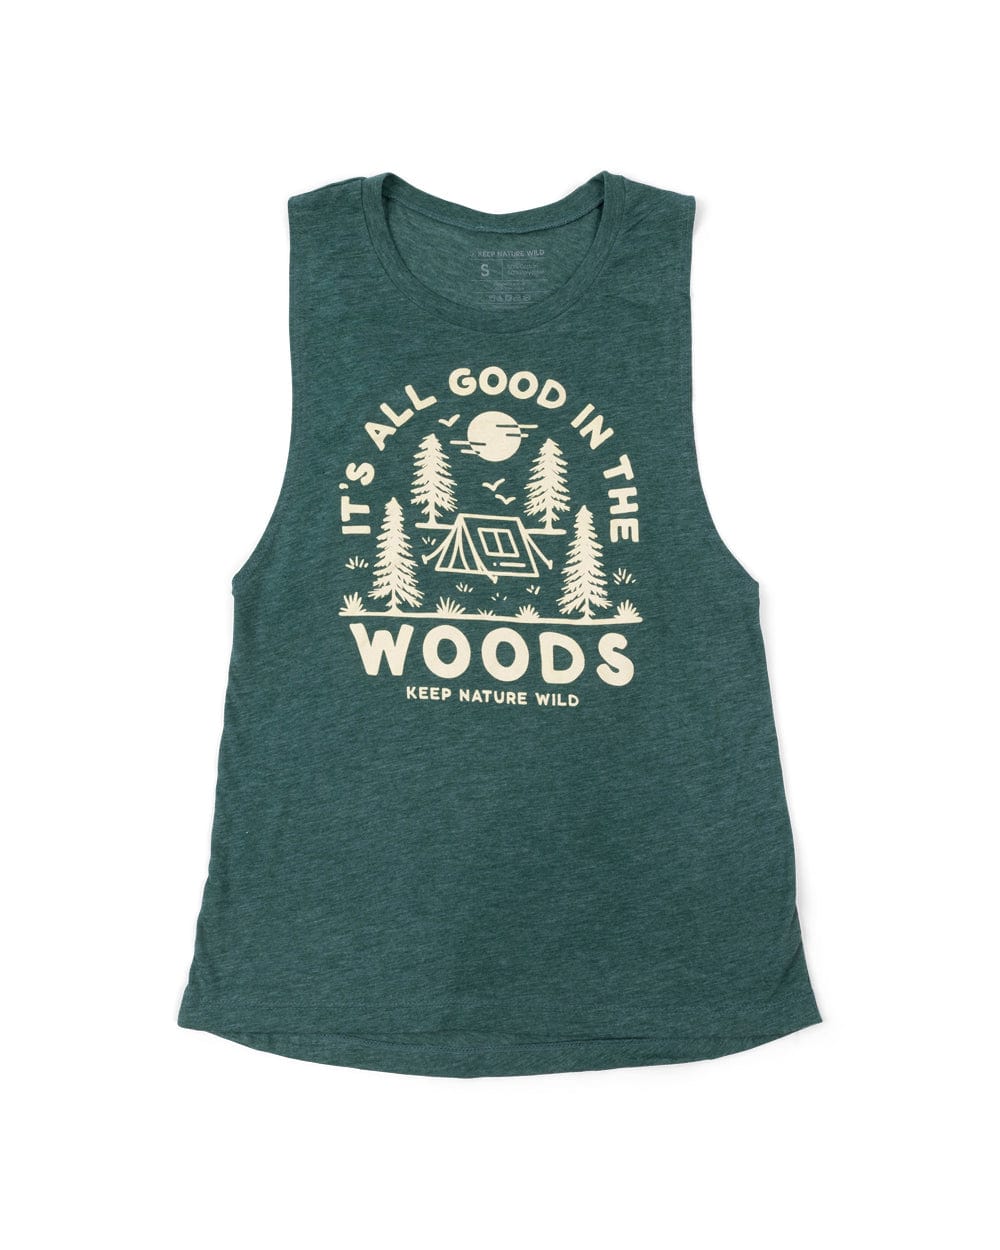 Keep Nature Wild Tank Good in the Woods Women's Muscle Tank | Forest